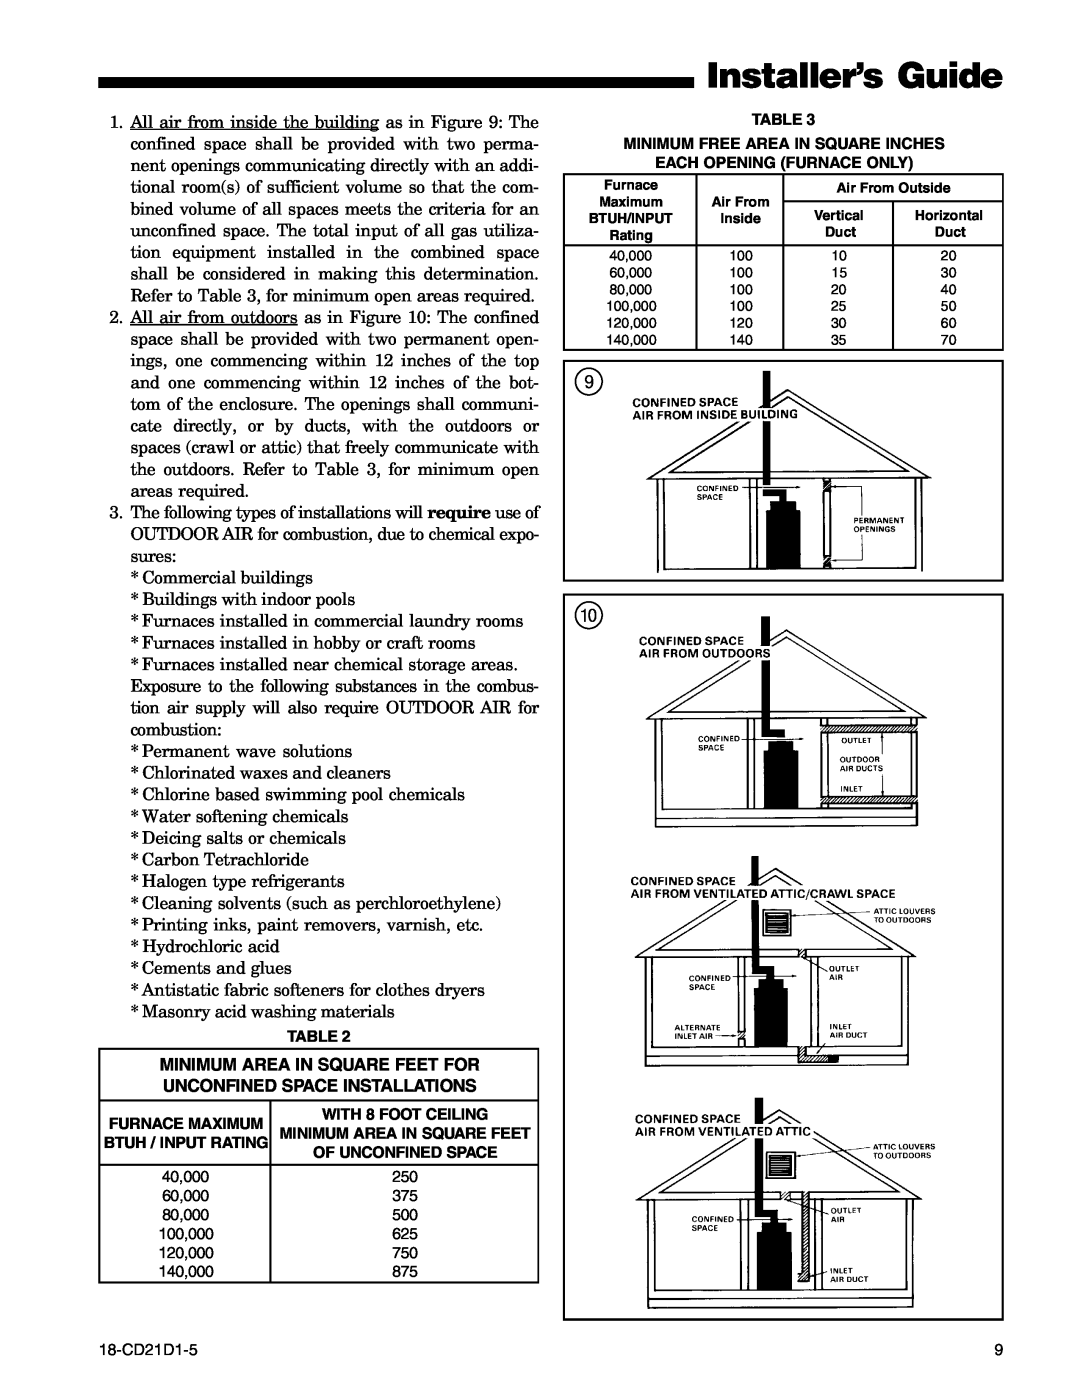 Trane DD1B080A9H31B, UD1D120A9H51B manual Installer’s Guide, Minimum Area In Square Feet For, Unconfined Space Installations 